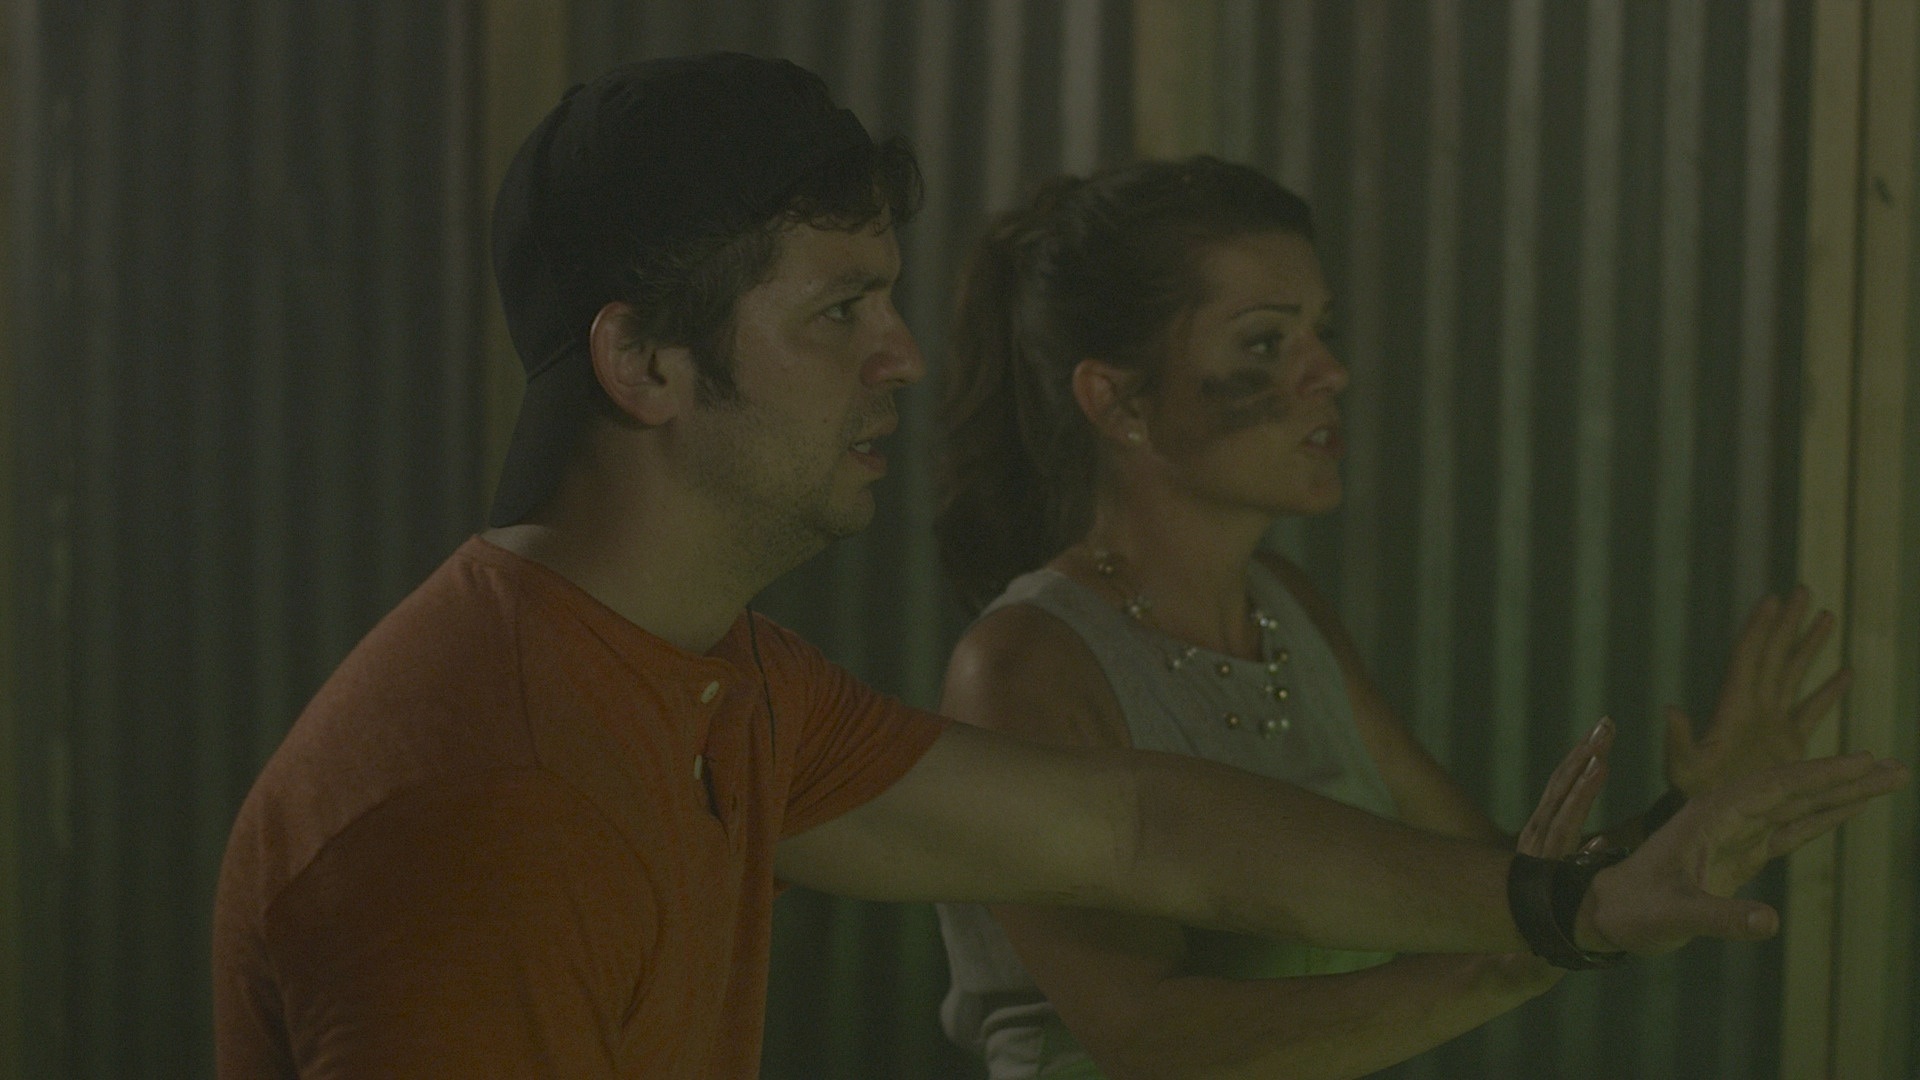 Todd Jenkins as Aaron and Mindy Raymond as Kendall Sharp in BIGFOOT WARS.